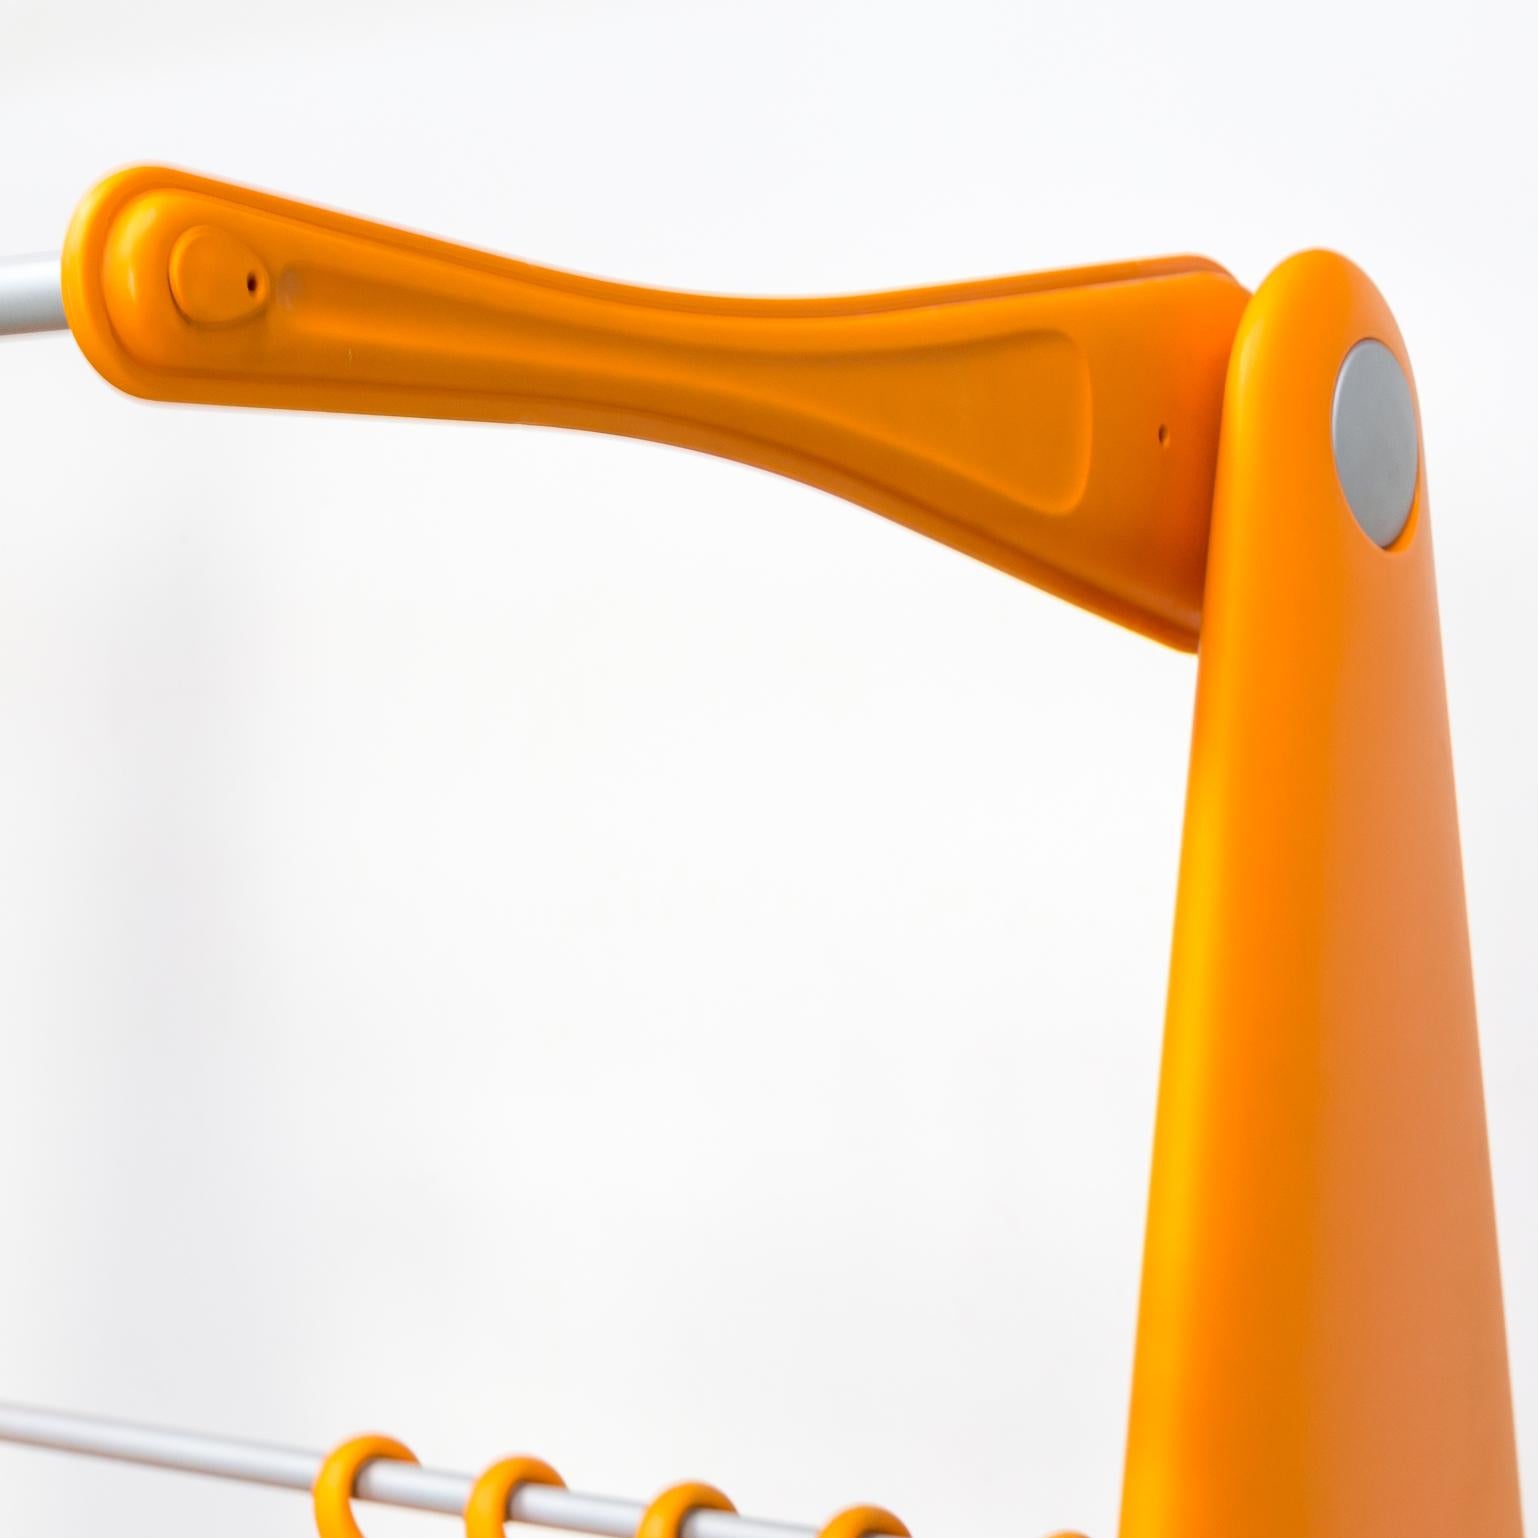 E. Terragni Coat Stand ‘Atelier’ & Servetto Lift and Dino Clothes Hangers (Acryl) im Angebot